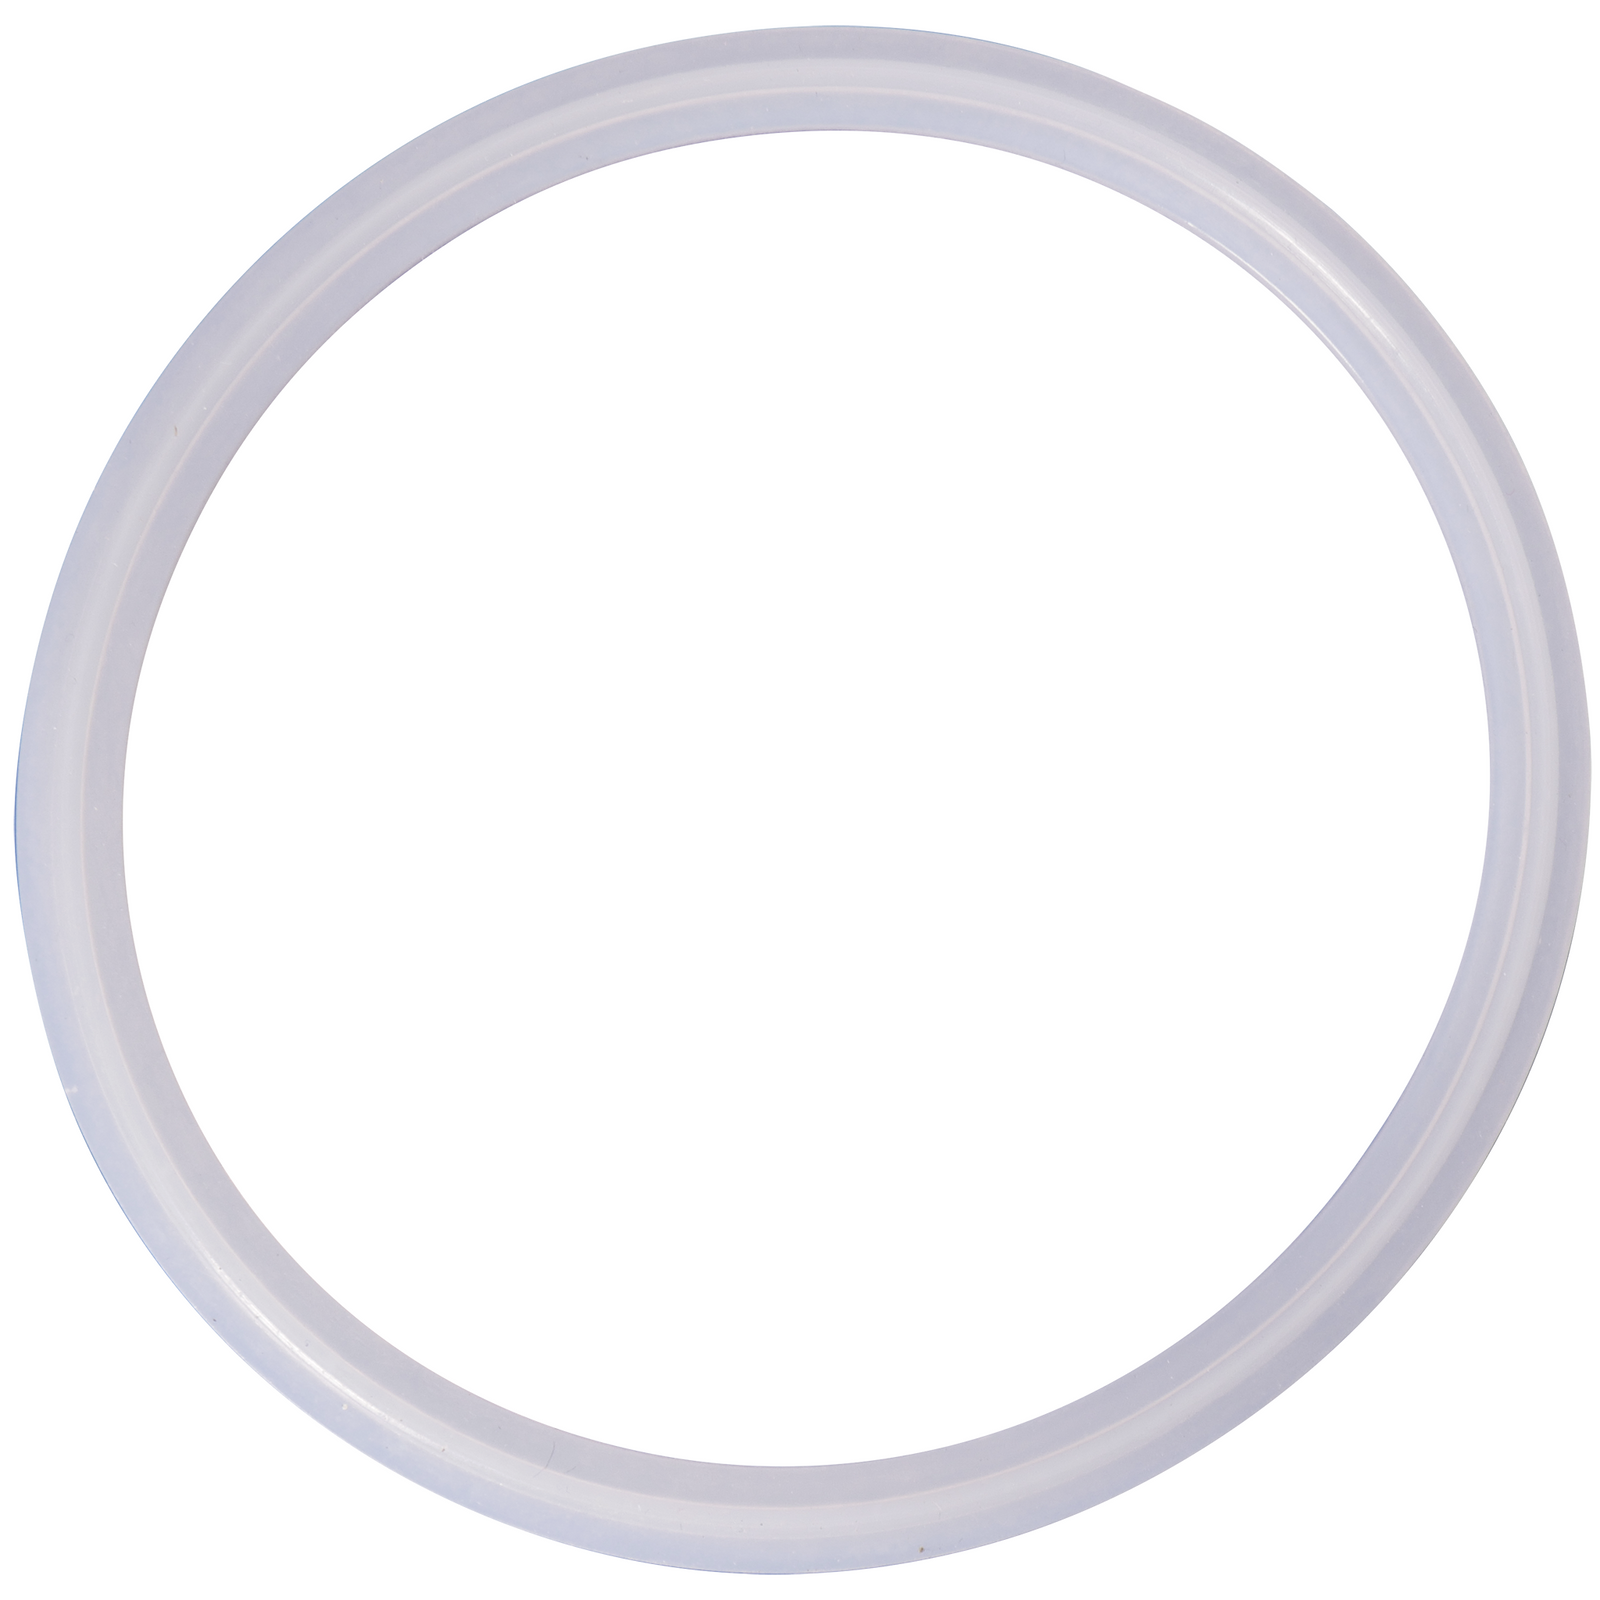 5 inch white silicone gasket